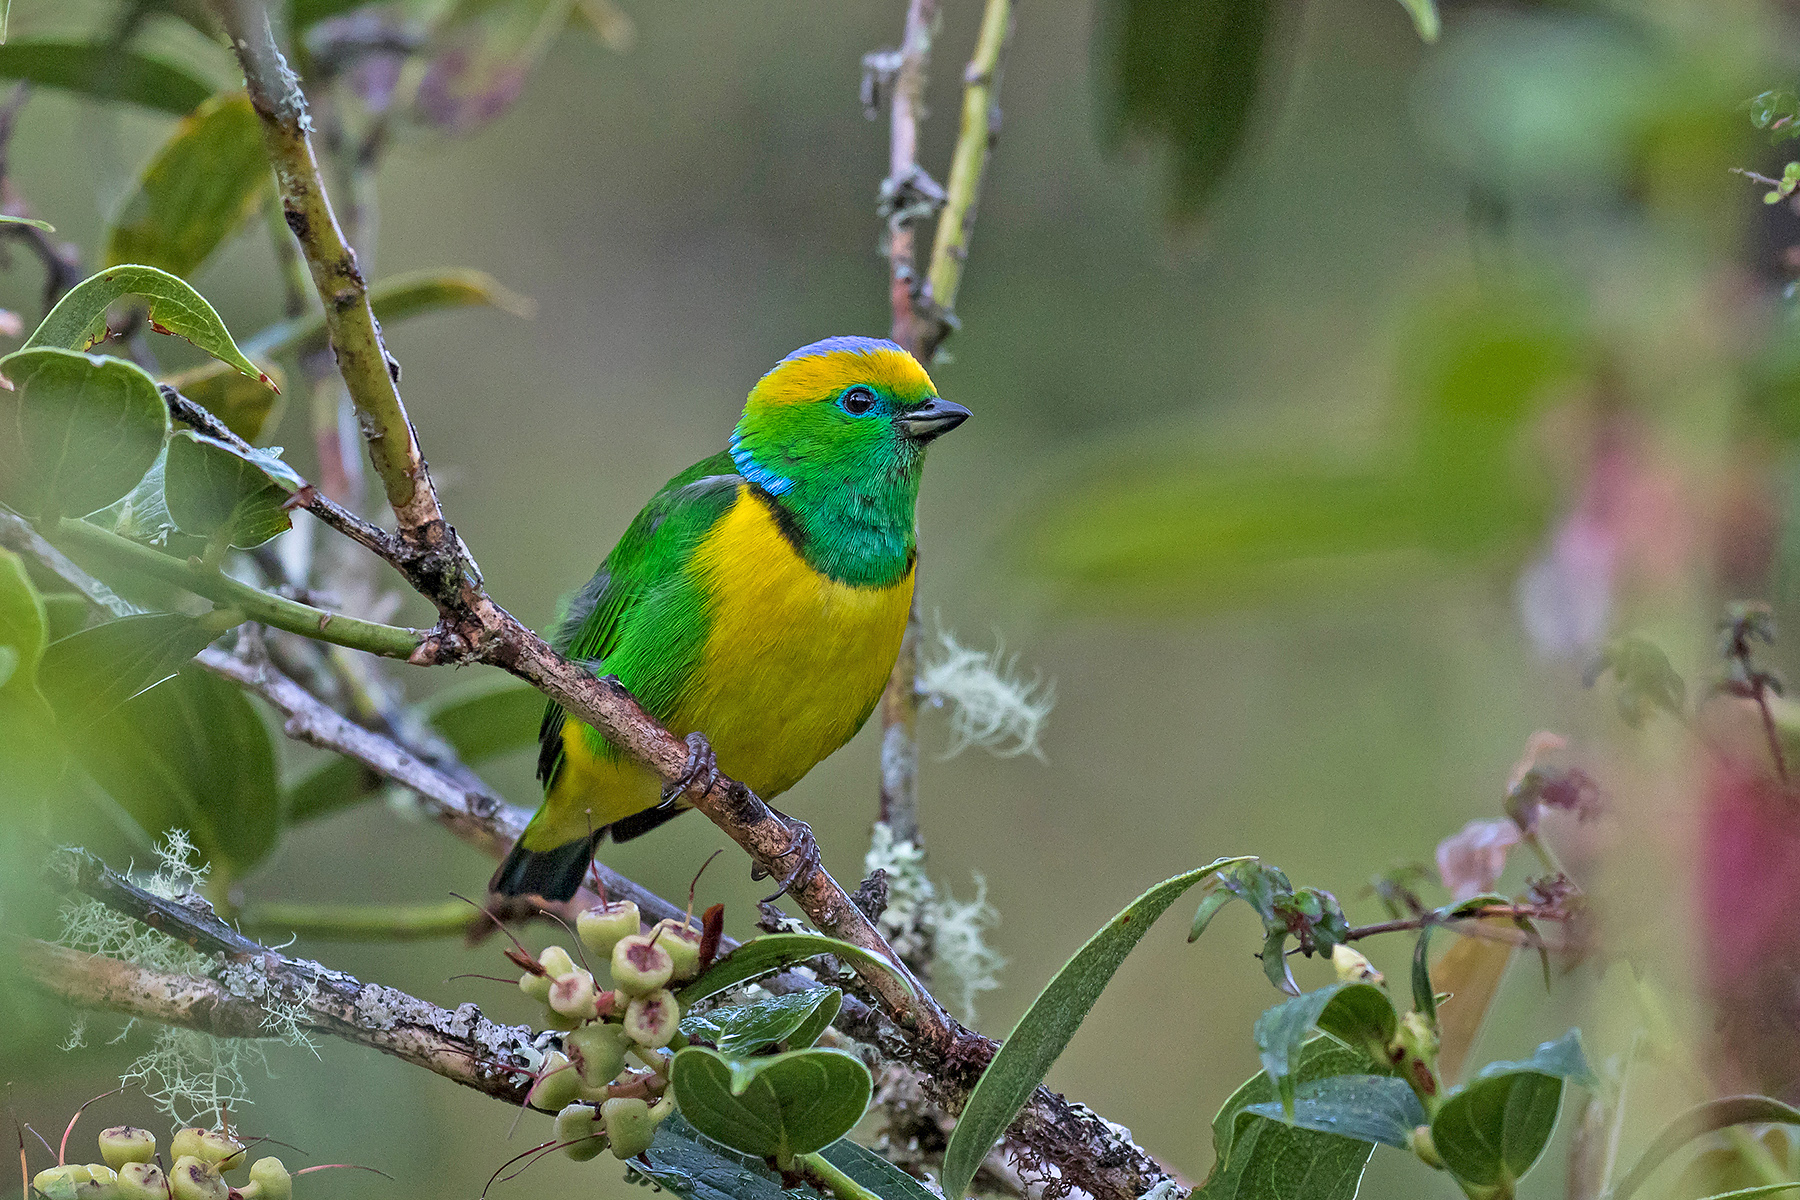 Golden-browed Chlorophonia on our Costa Rica birding tour (image by Pete Morris)